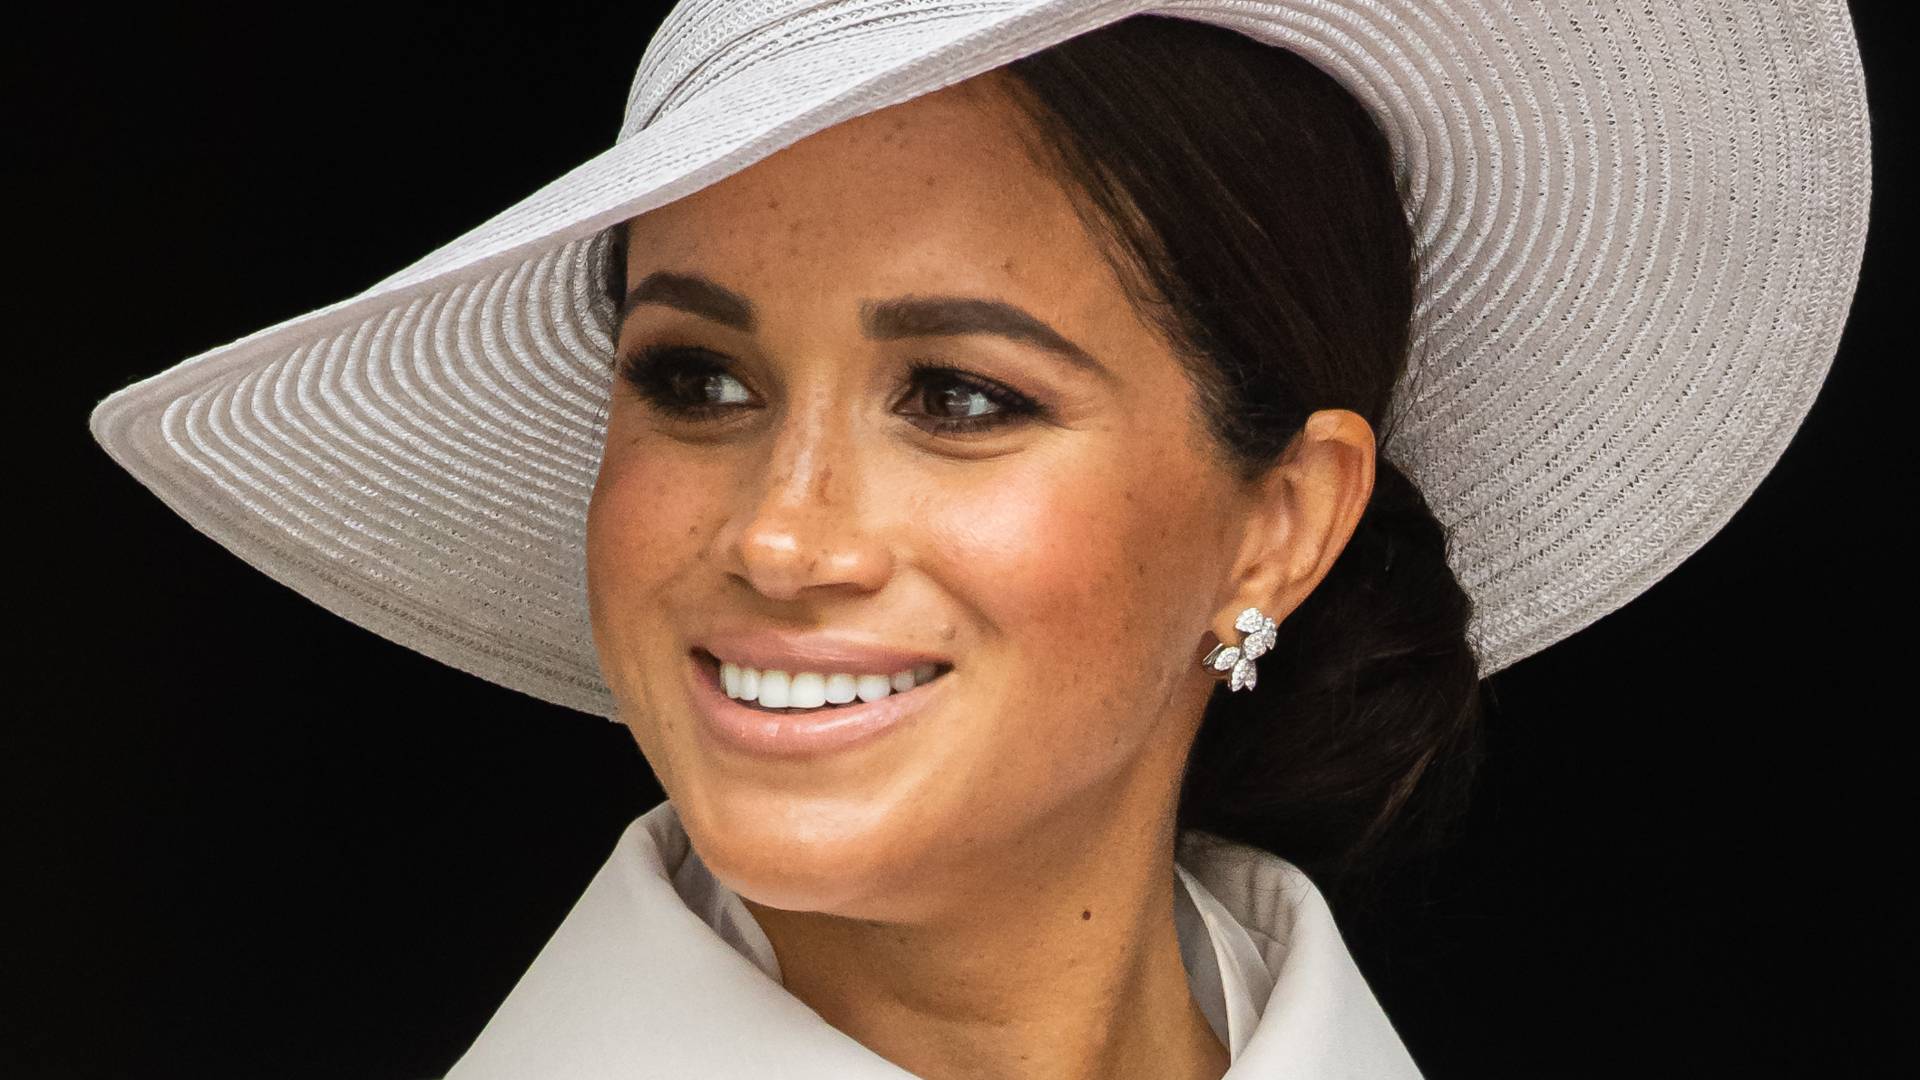 Meghan, Duchess of Sussex attends the National Service of Thanksgiving at St Paul's Cathedral on June 03, 2022 in London, England. The Platinum Jubilee of Elizabeth II is being celebrated from June 2 to June 5, 2022, in the UK and Commonwealth to mark the 70th anniversary of the accession of Queen Elizabeth II on 6 February 1952. on June 03, 2022 in London, England. The Platinum Jubilee of Elizabeth II is being celebrated from June 2 to June 5, 2022, in the UK and Commonwealth to mark the 70th anniversary of the accession of Queen Elizabeth II on 6 February 1952.